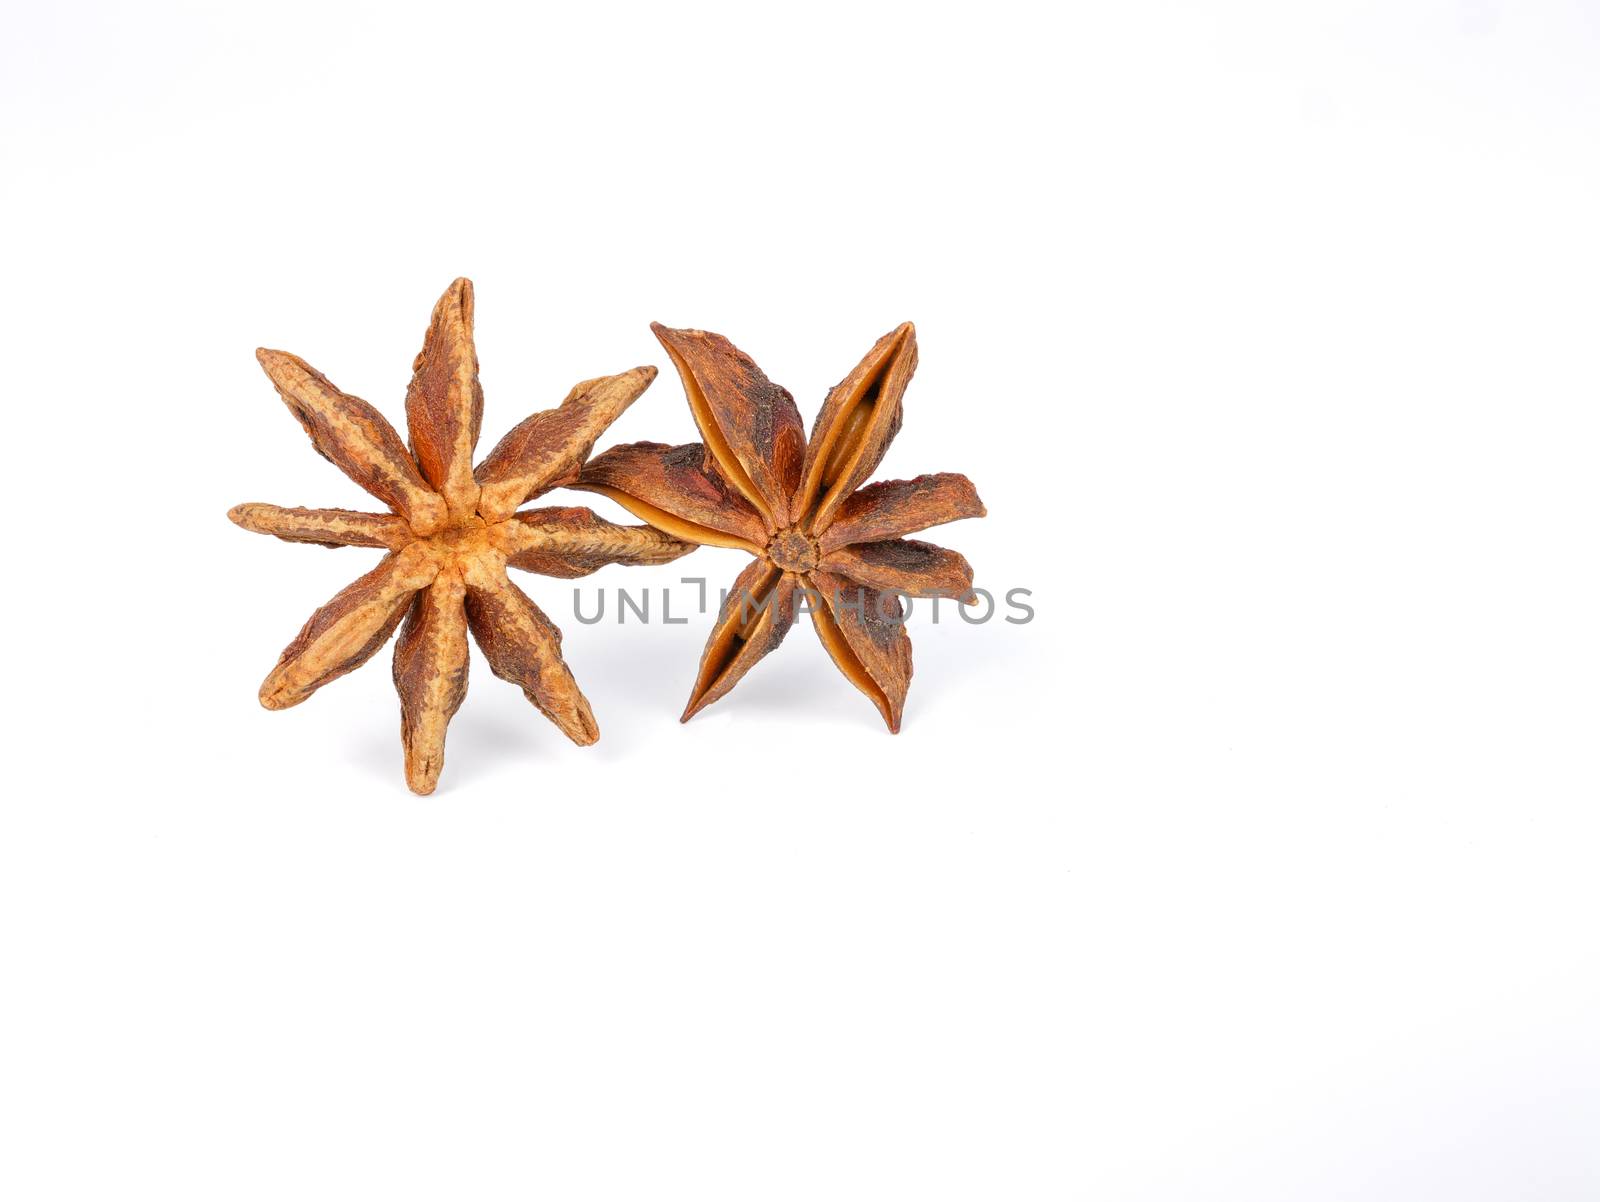 two brown star anises, isolated on white background